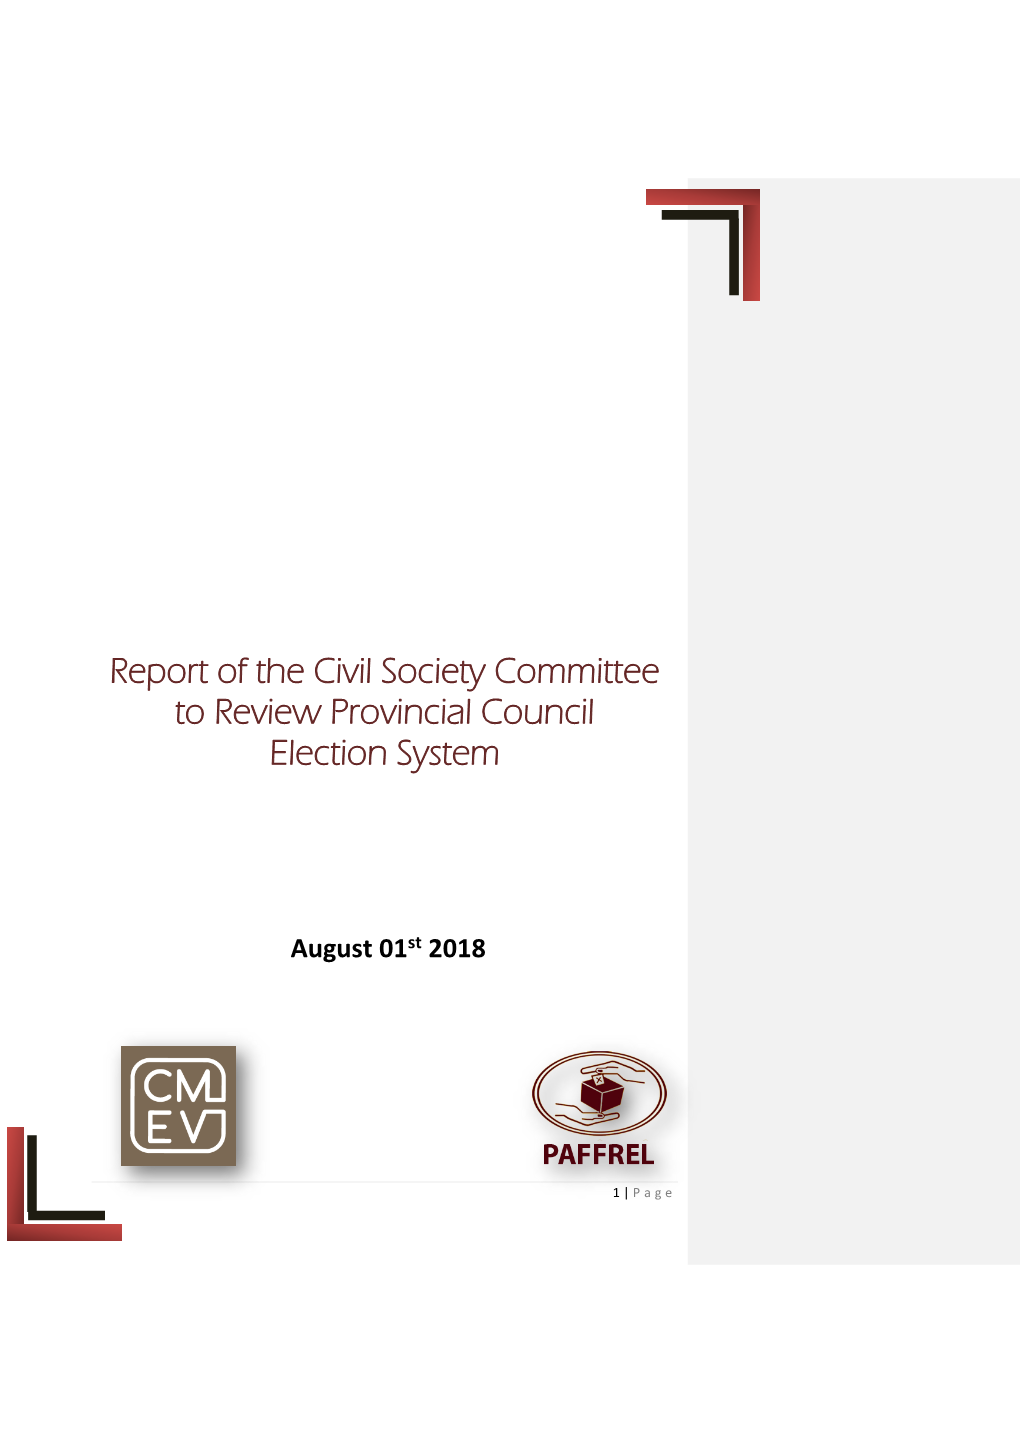 Report of the Civil Society Committee to Review Provincial Council Election System